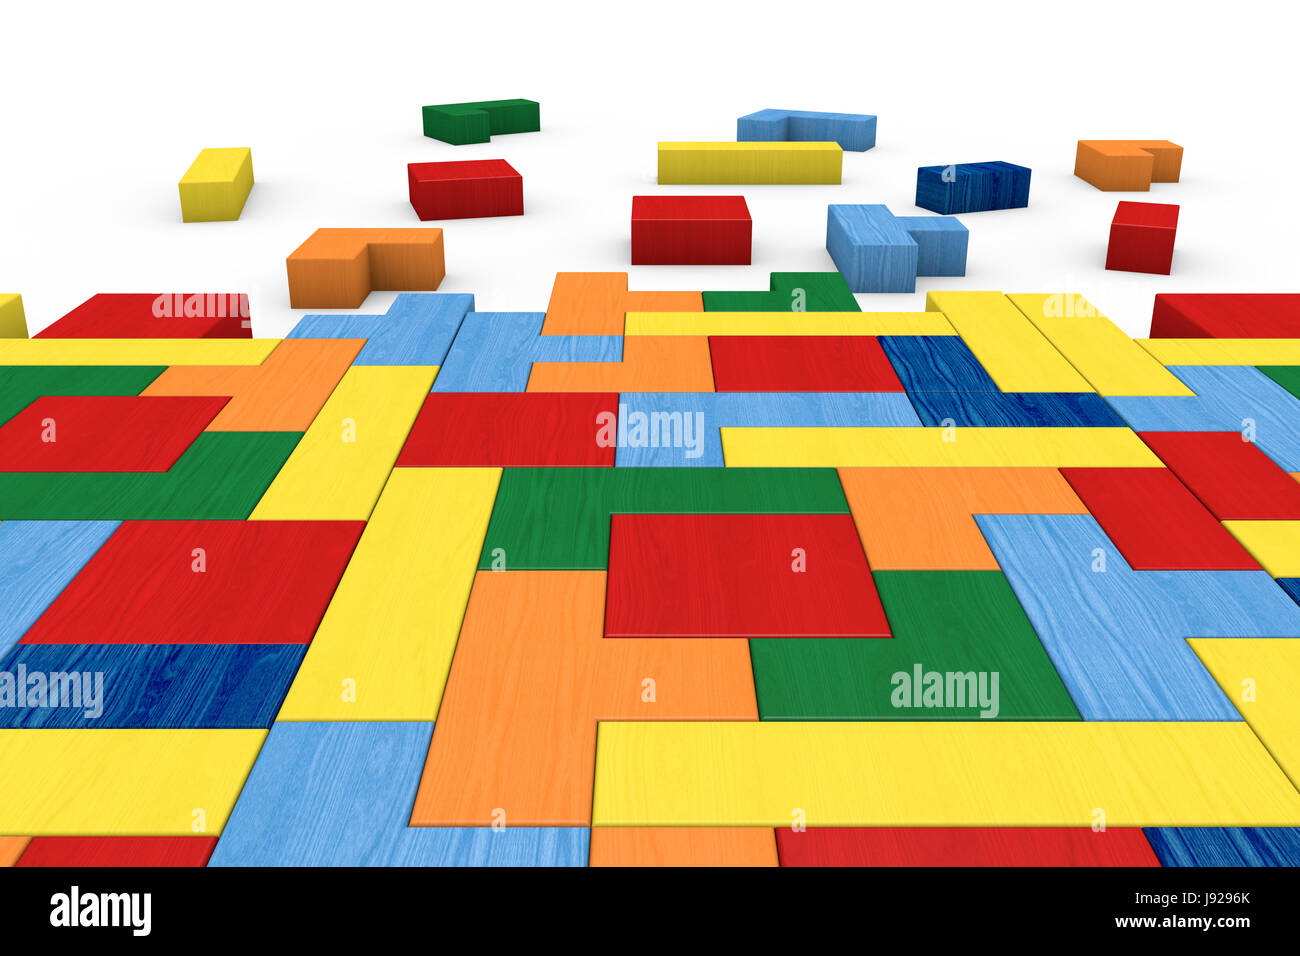 blue, object, education, art, game, tournament, play, playing, plays, played, Stock Photo